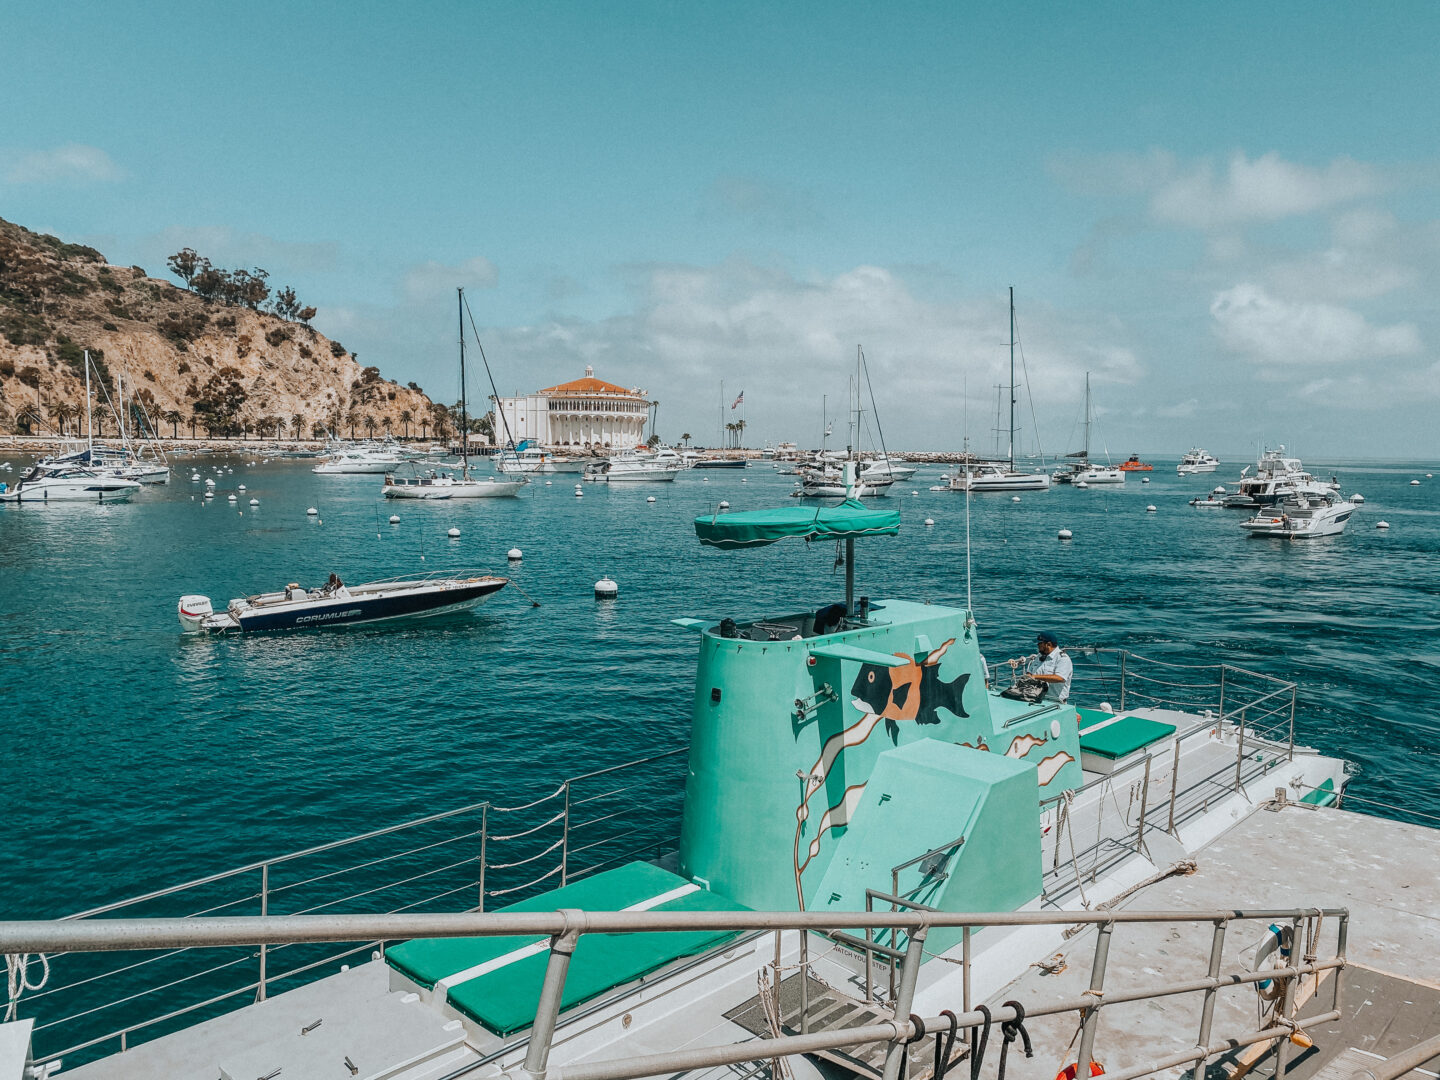 Things to do on Catalina Island